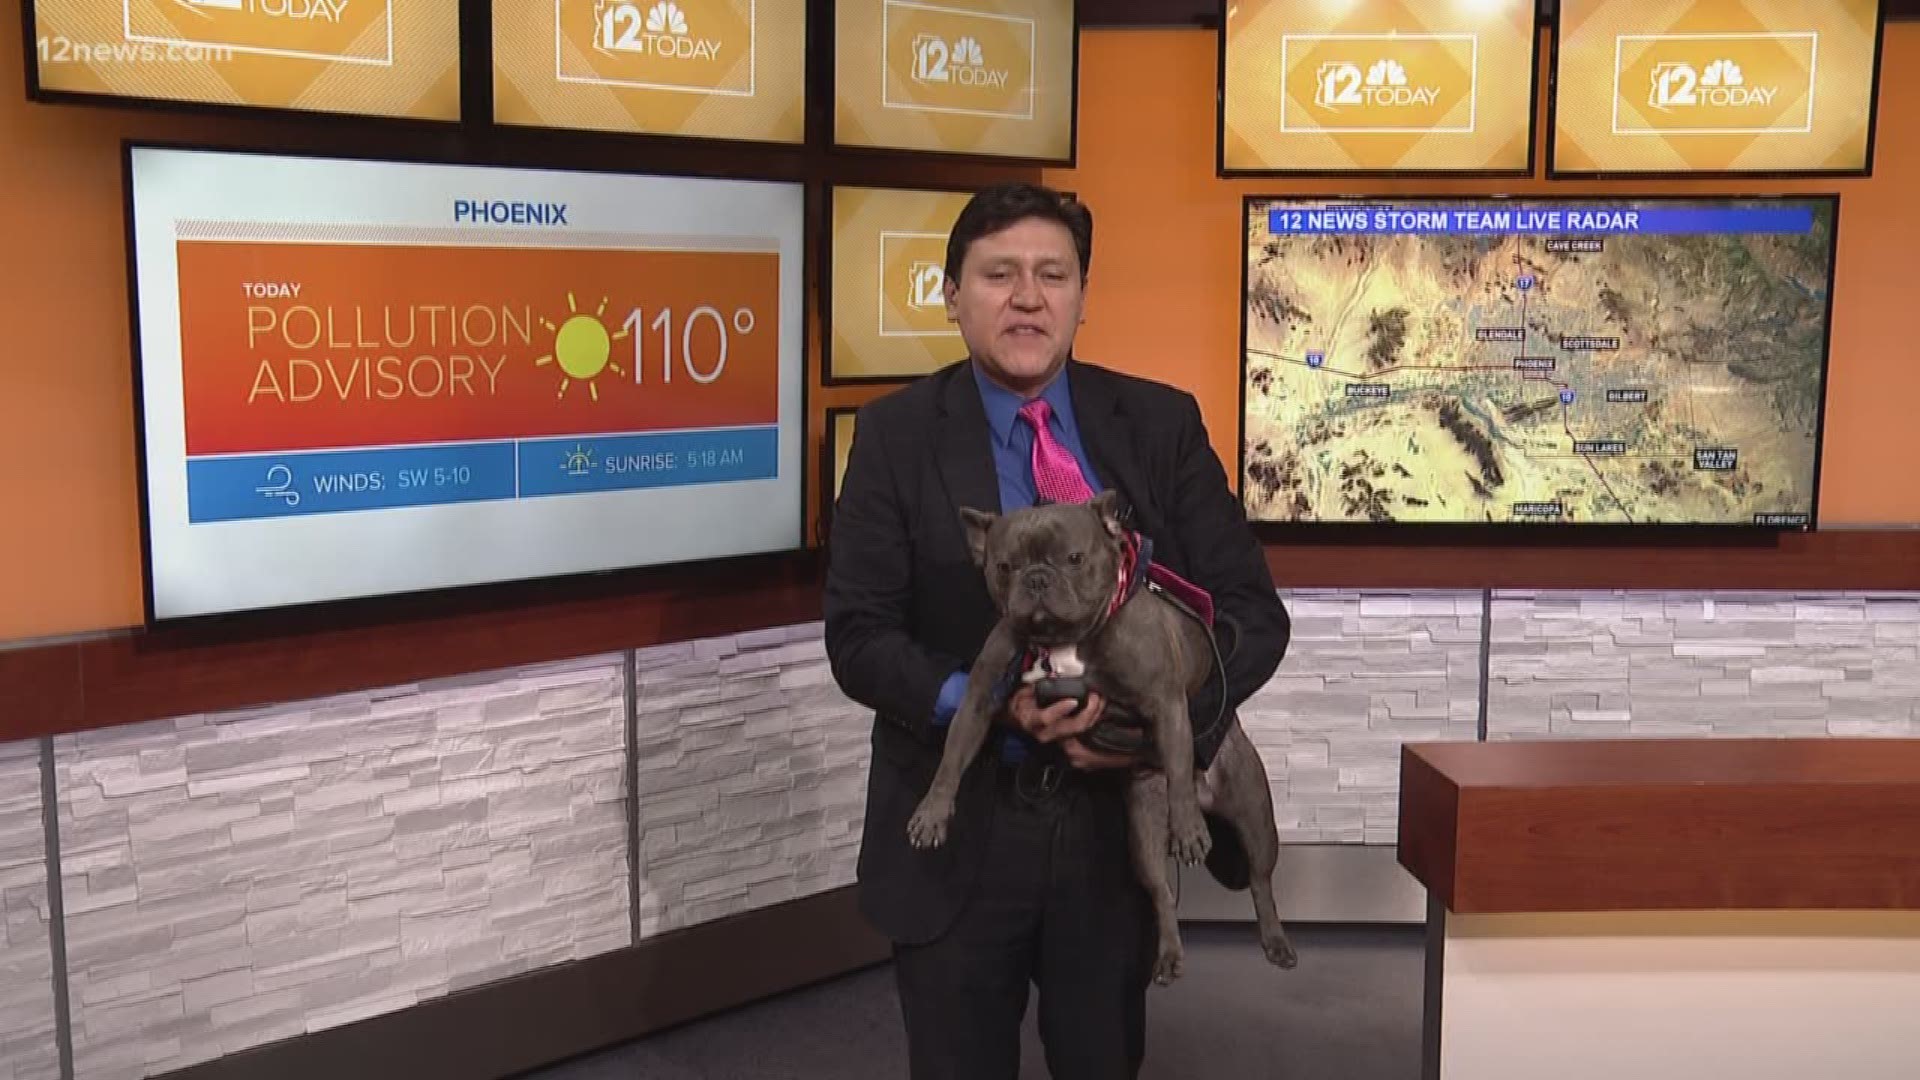 To celebrate Take Your Dog to Work Day, Jimmy Q brought in his dog to help with the Phoenix forecast.